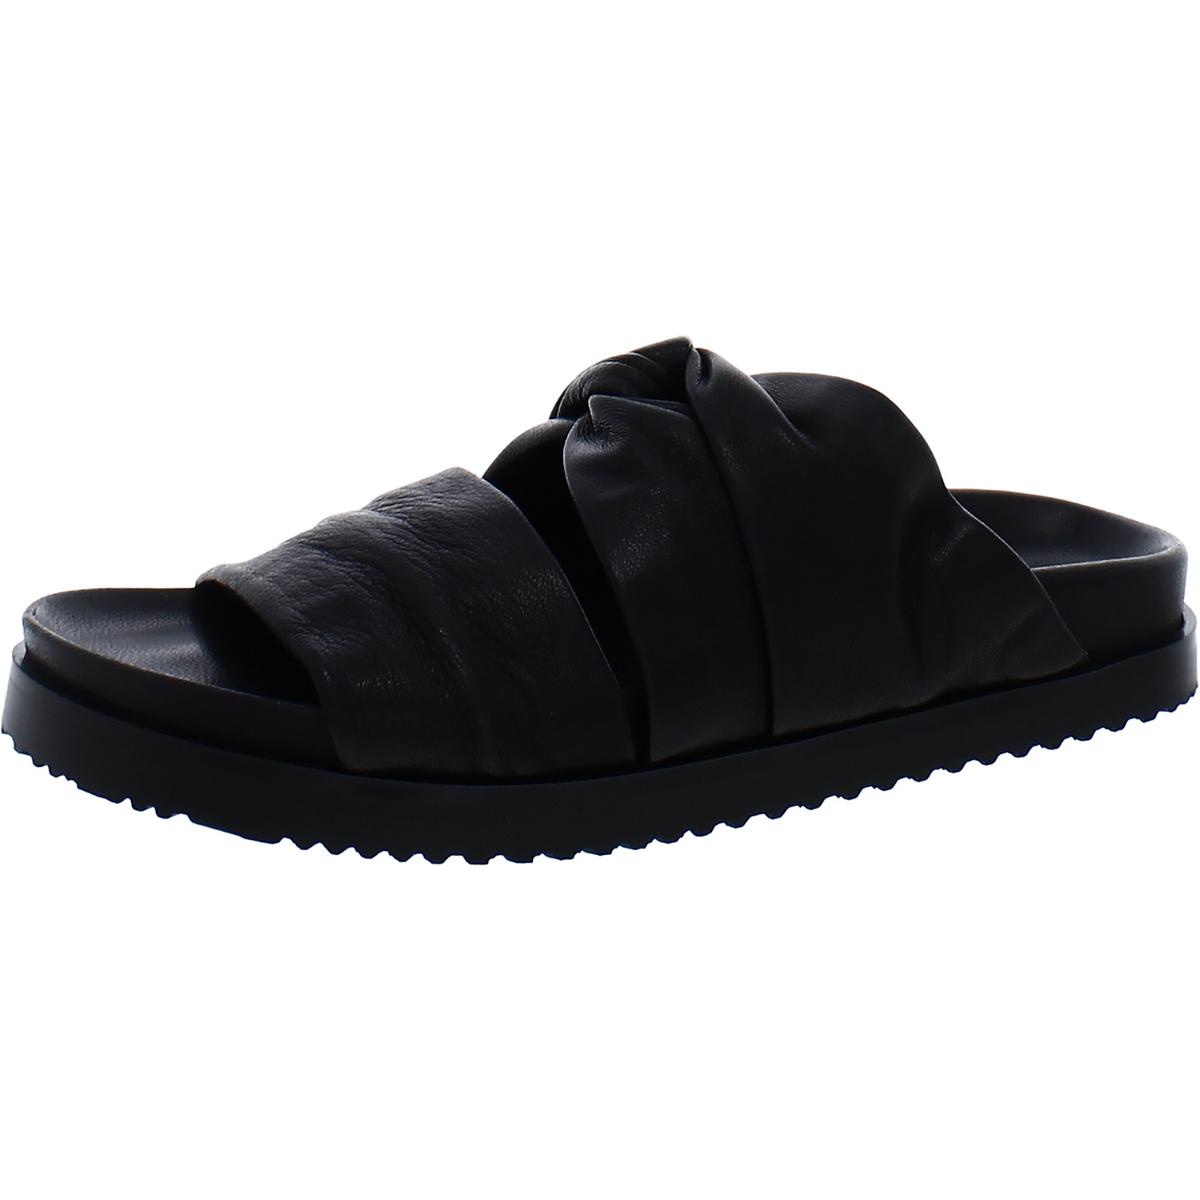 3.1 Phillip Lim Twisted Womens Leather Knot Front Pool Slides